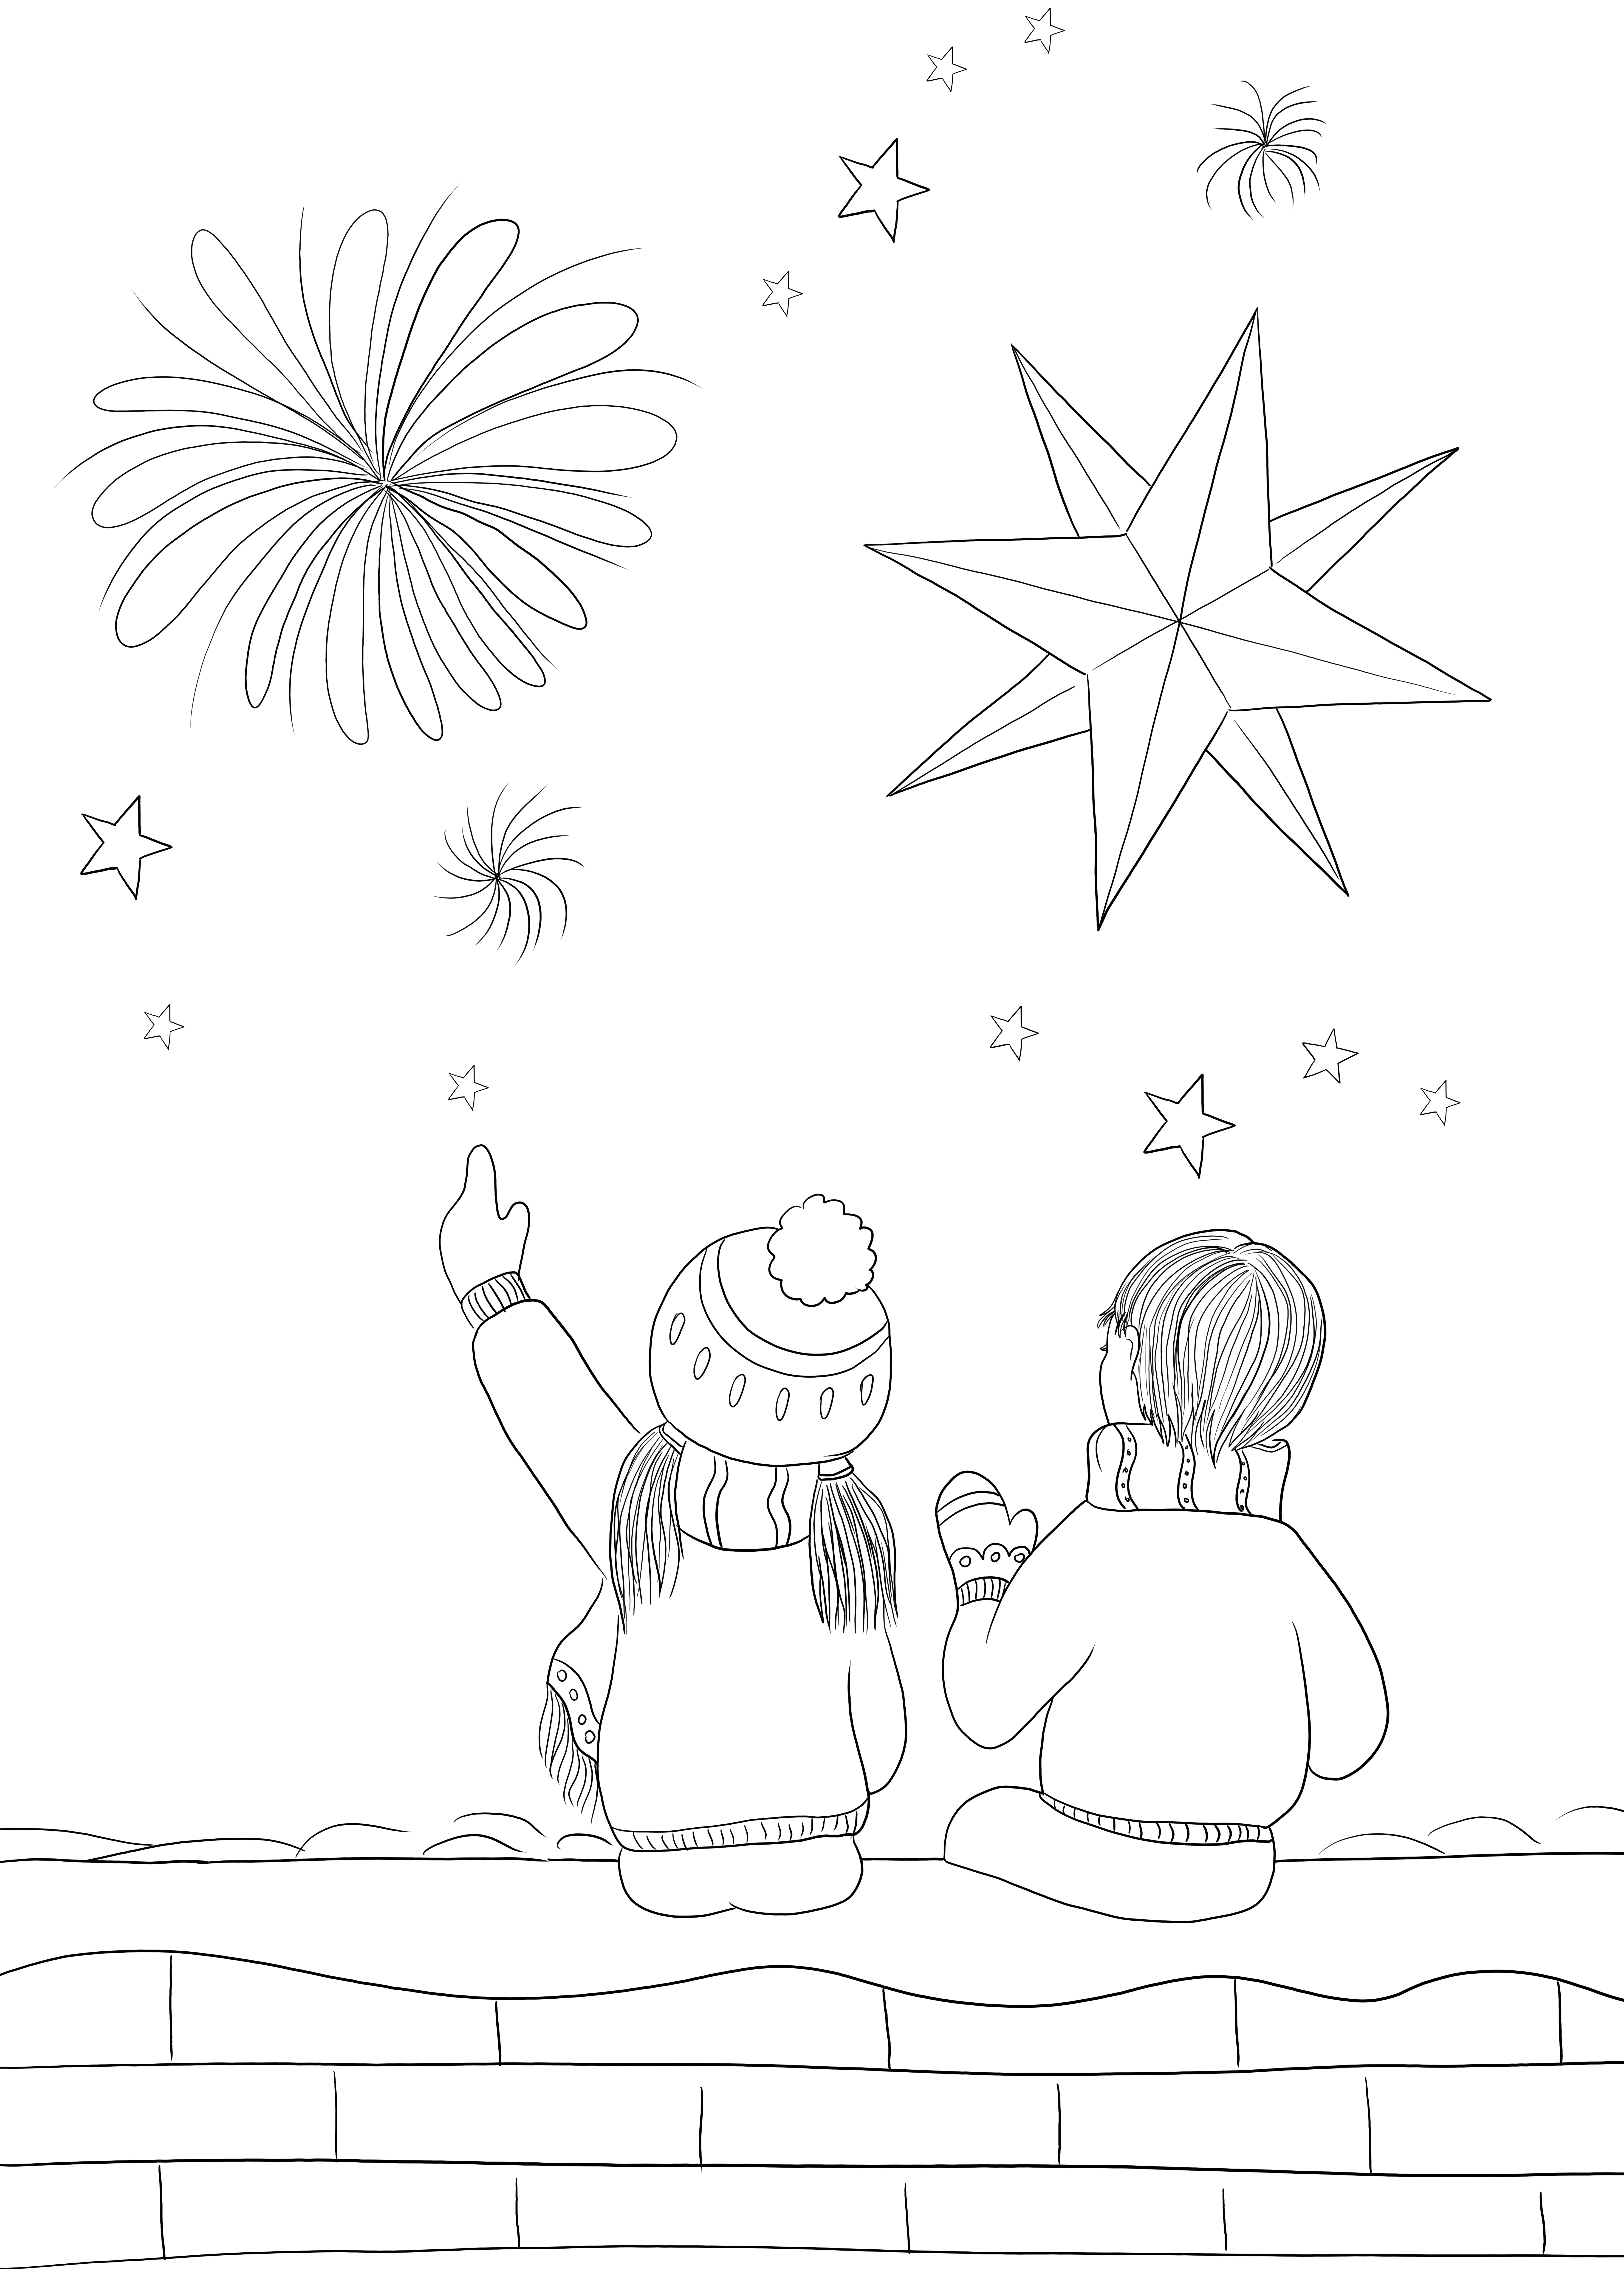 Christmas Light and fireworks sheet free to download and color